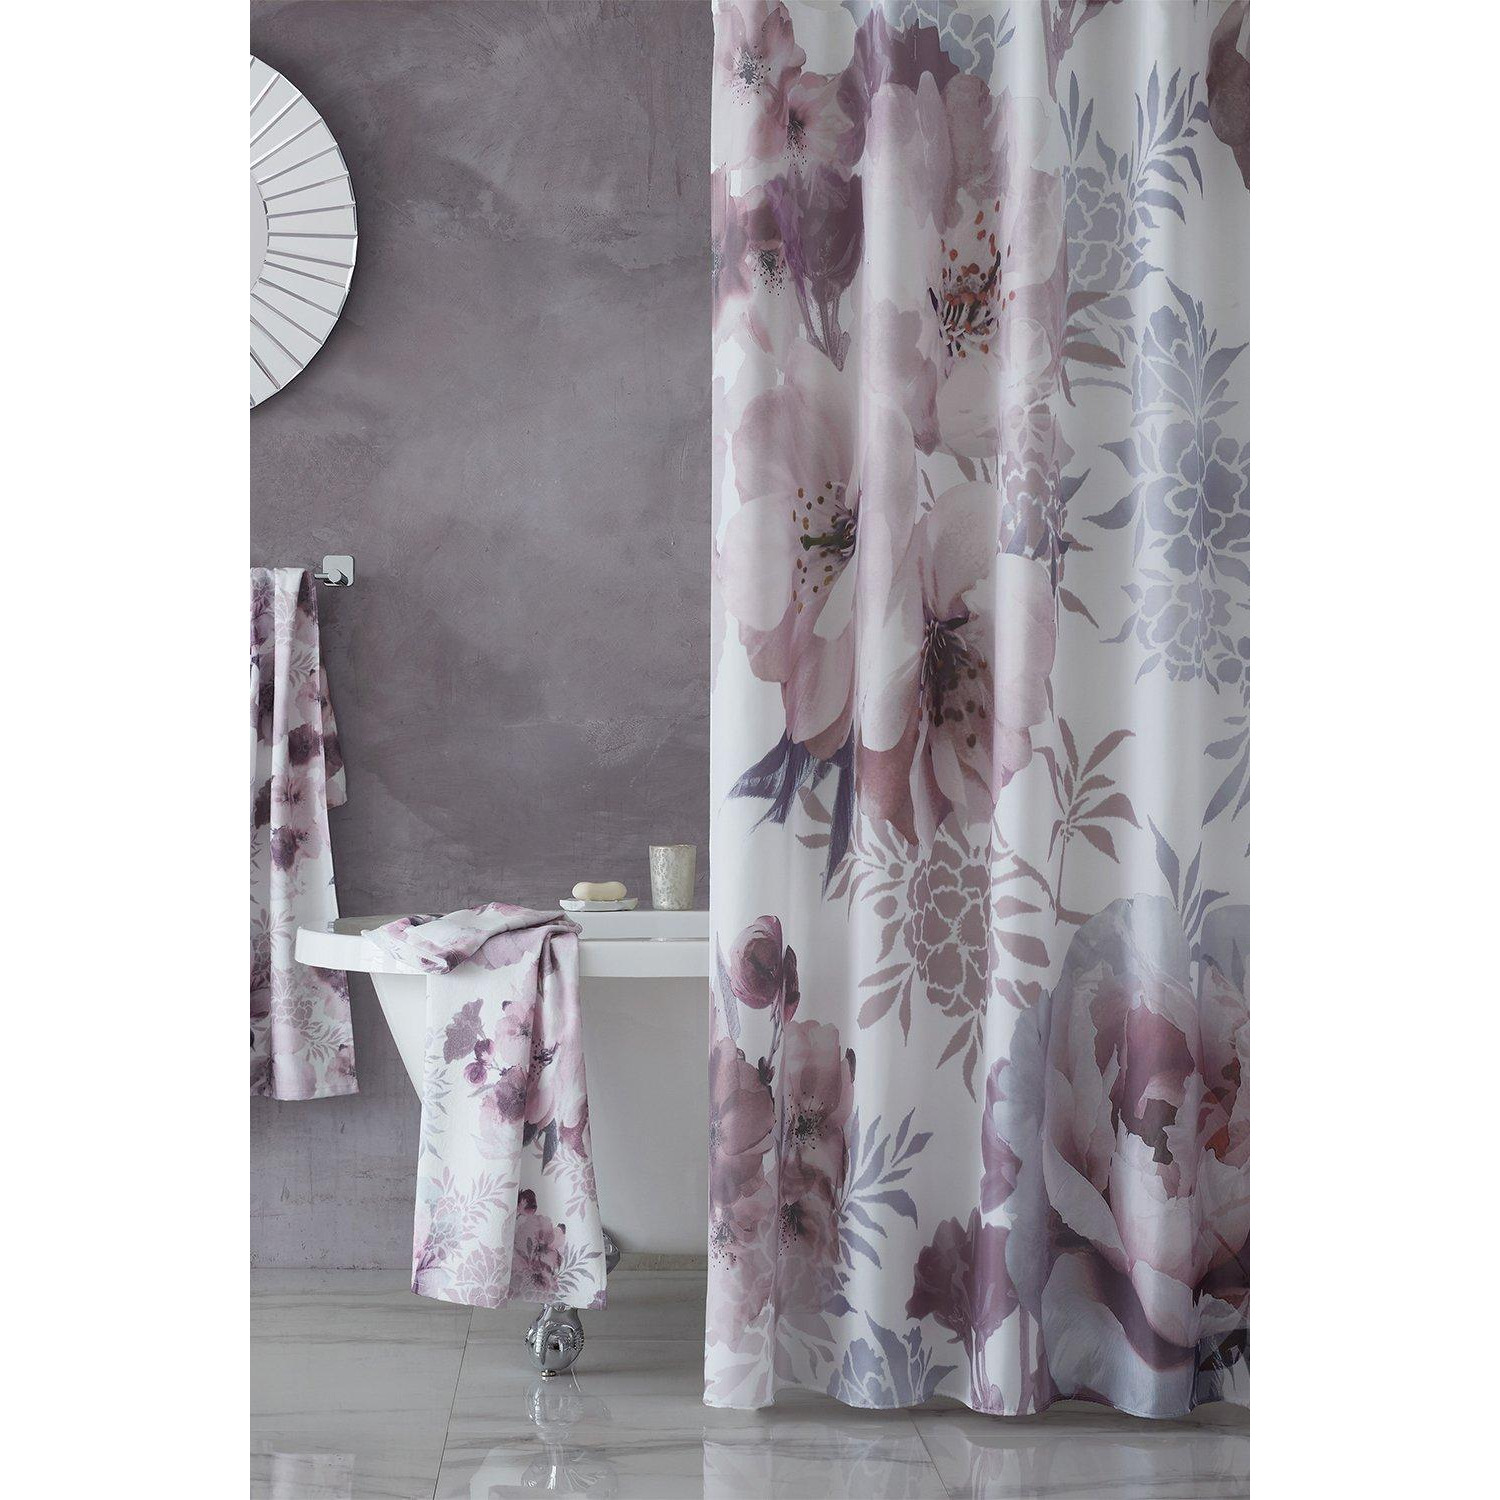 'Dramatic Floral' Shower Curtain - image 1